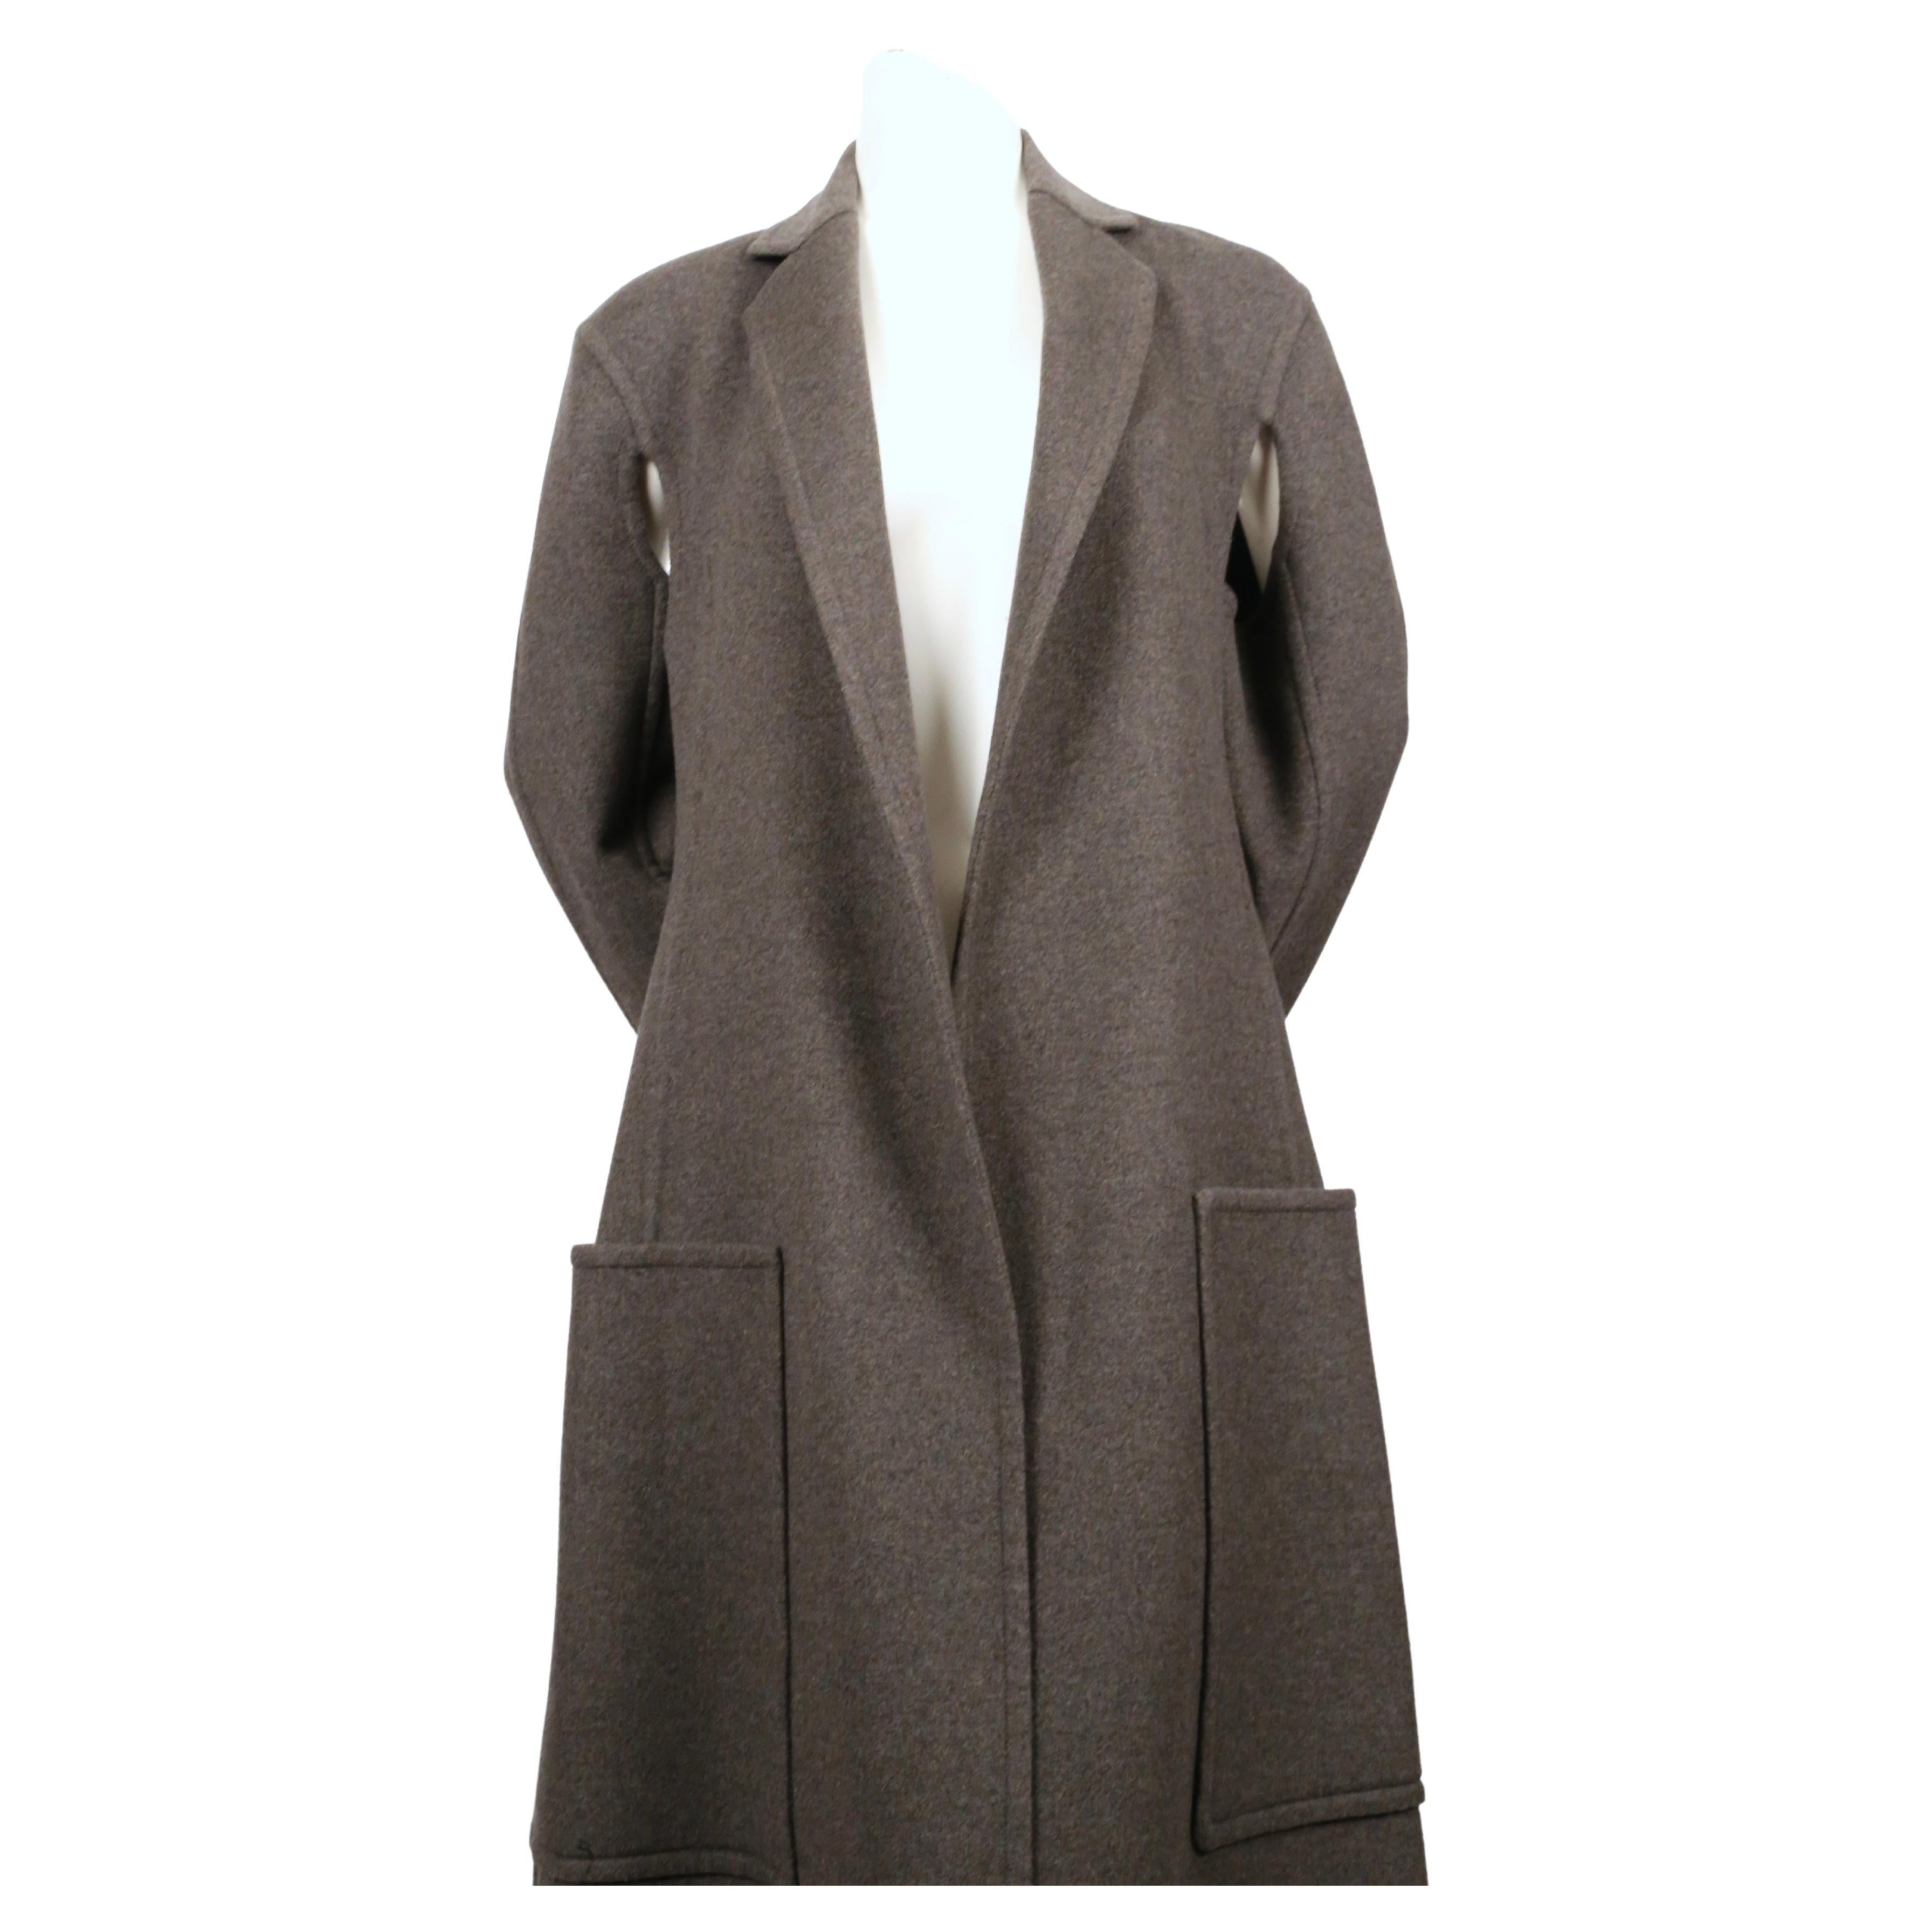 Very soft, heathered-grey, double faced cashmere coat with wrap around pockets and cutouts under arms designed by Phoebe Philo for Celine. French size 36.  Approximate measurements: shoulder 17